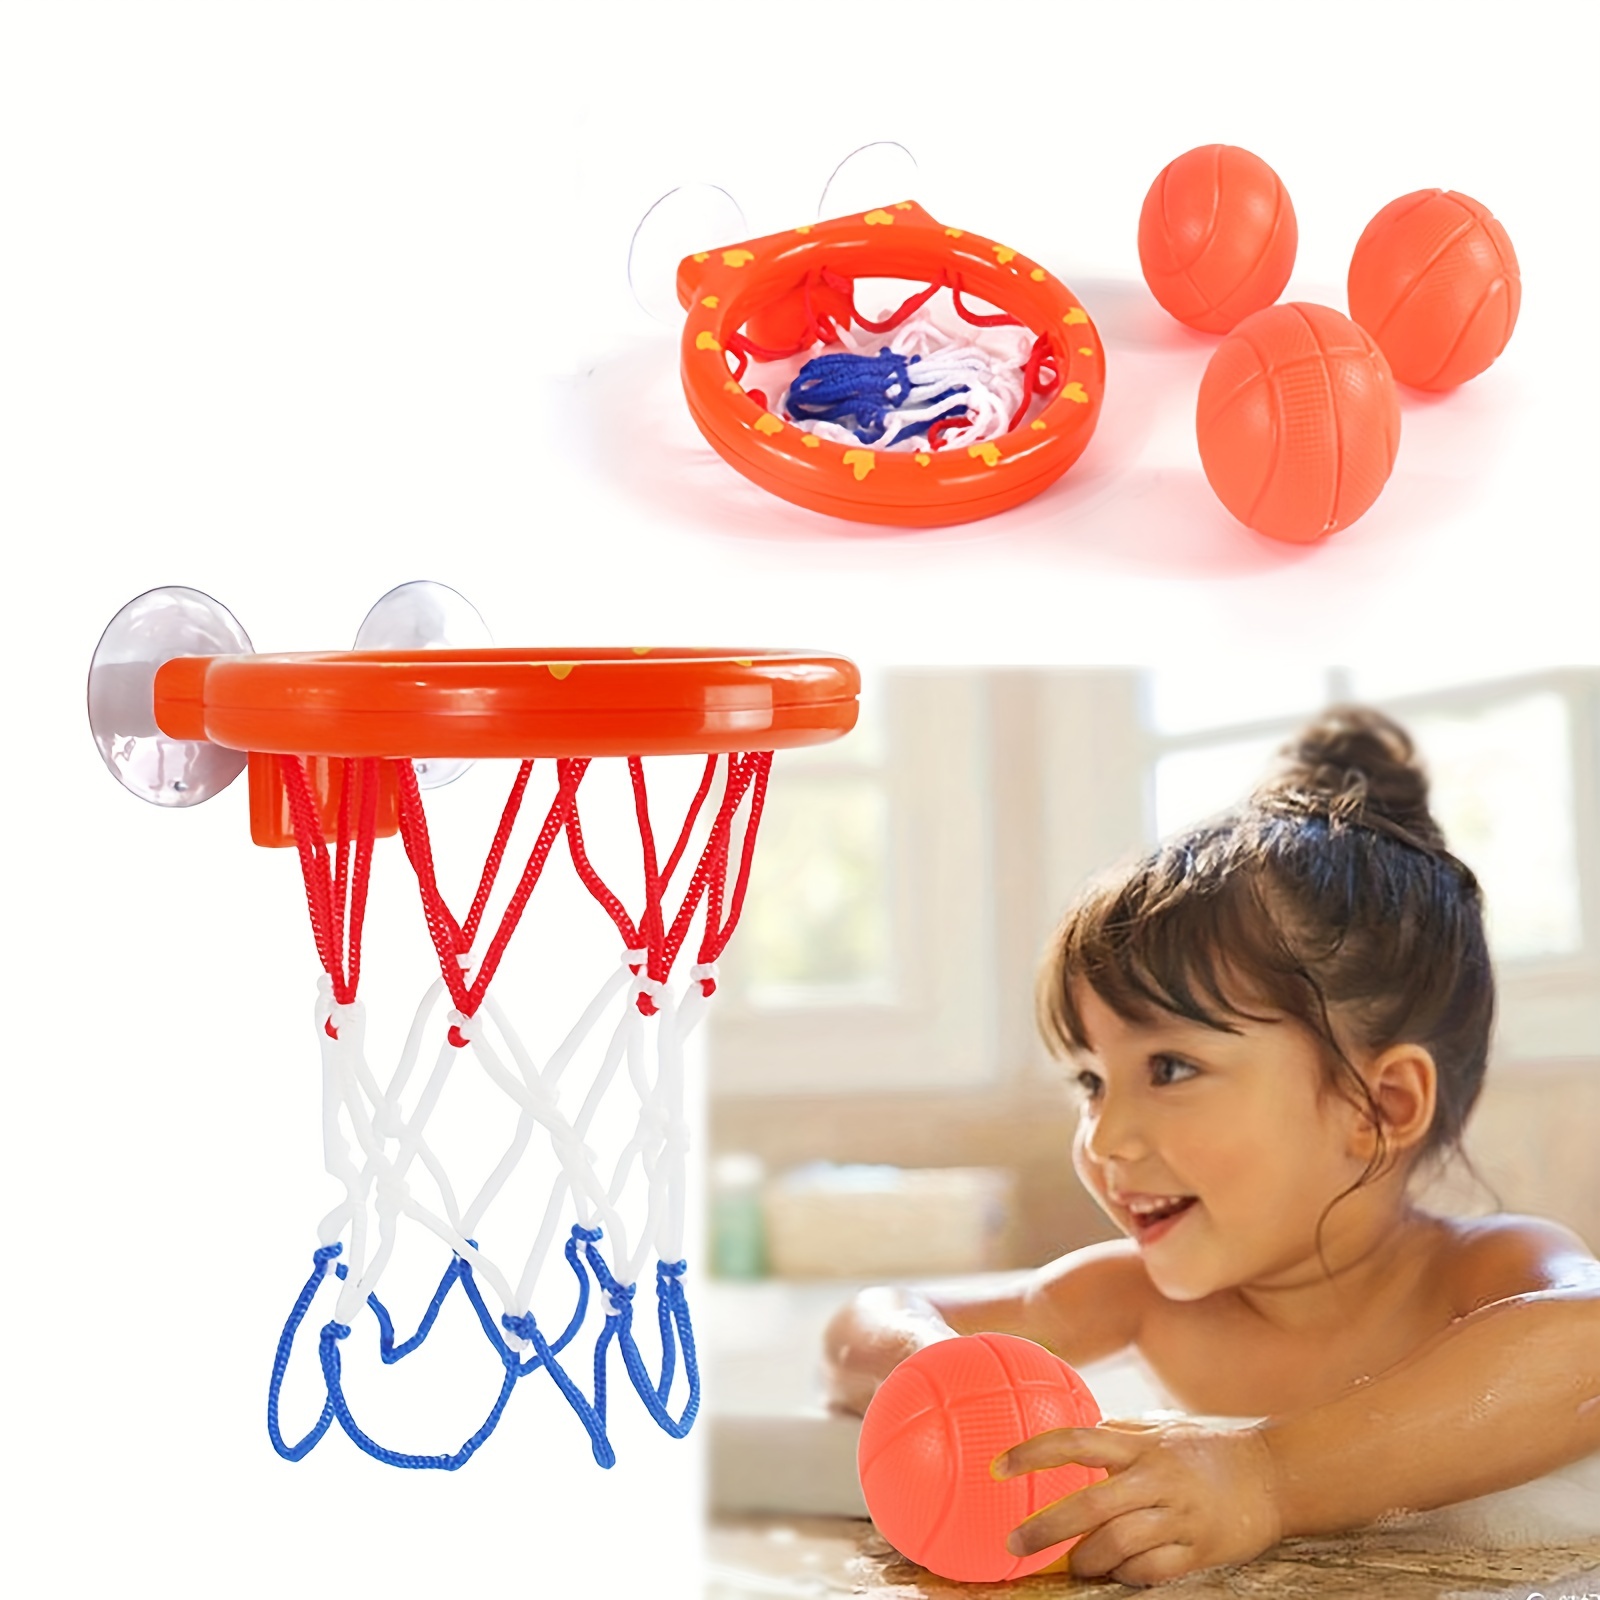 Fun Shooting Basket Basketball Bath Toy Set For Toddlers Includes 3 Mini  Plastic Basketballs For Baby Girls And Boys Perfect For Showers And Bathtub  Playtime 230621 From Wai08, $8.59